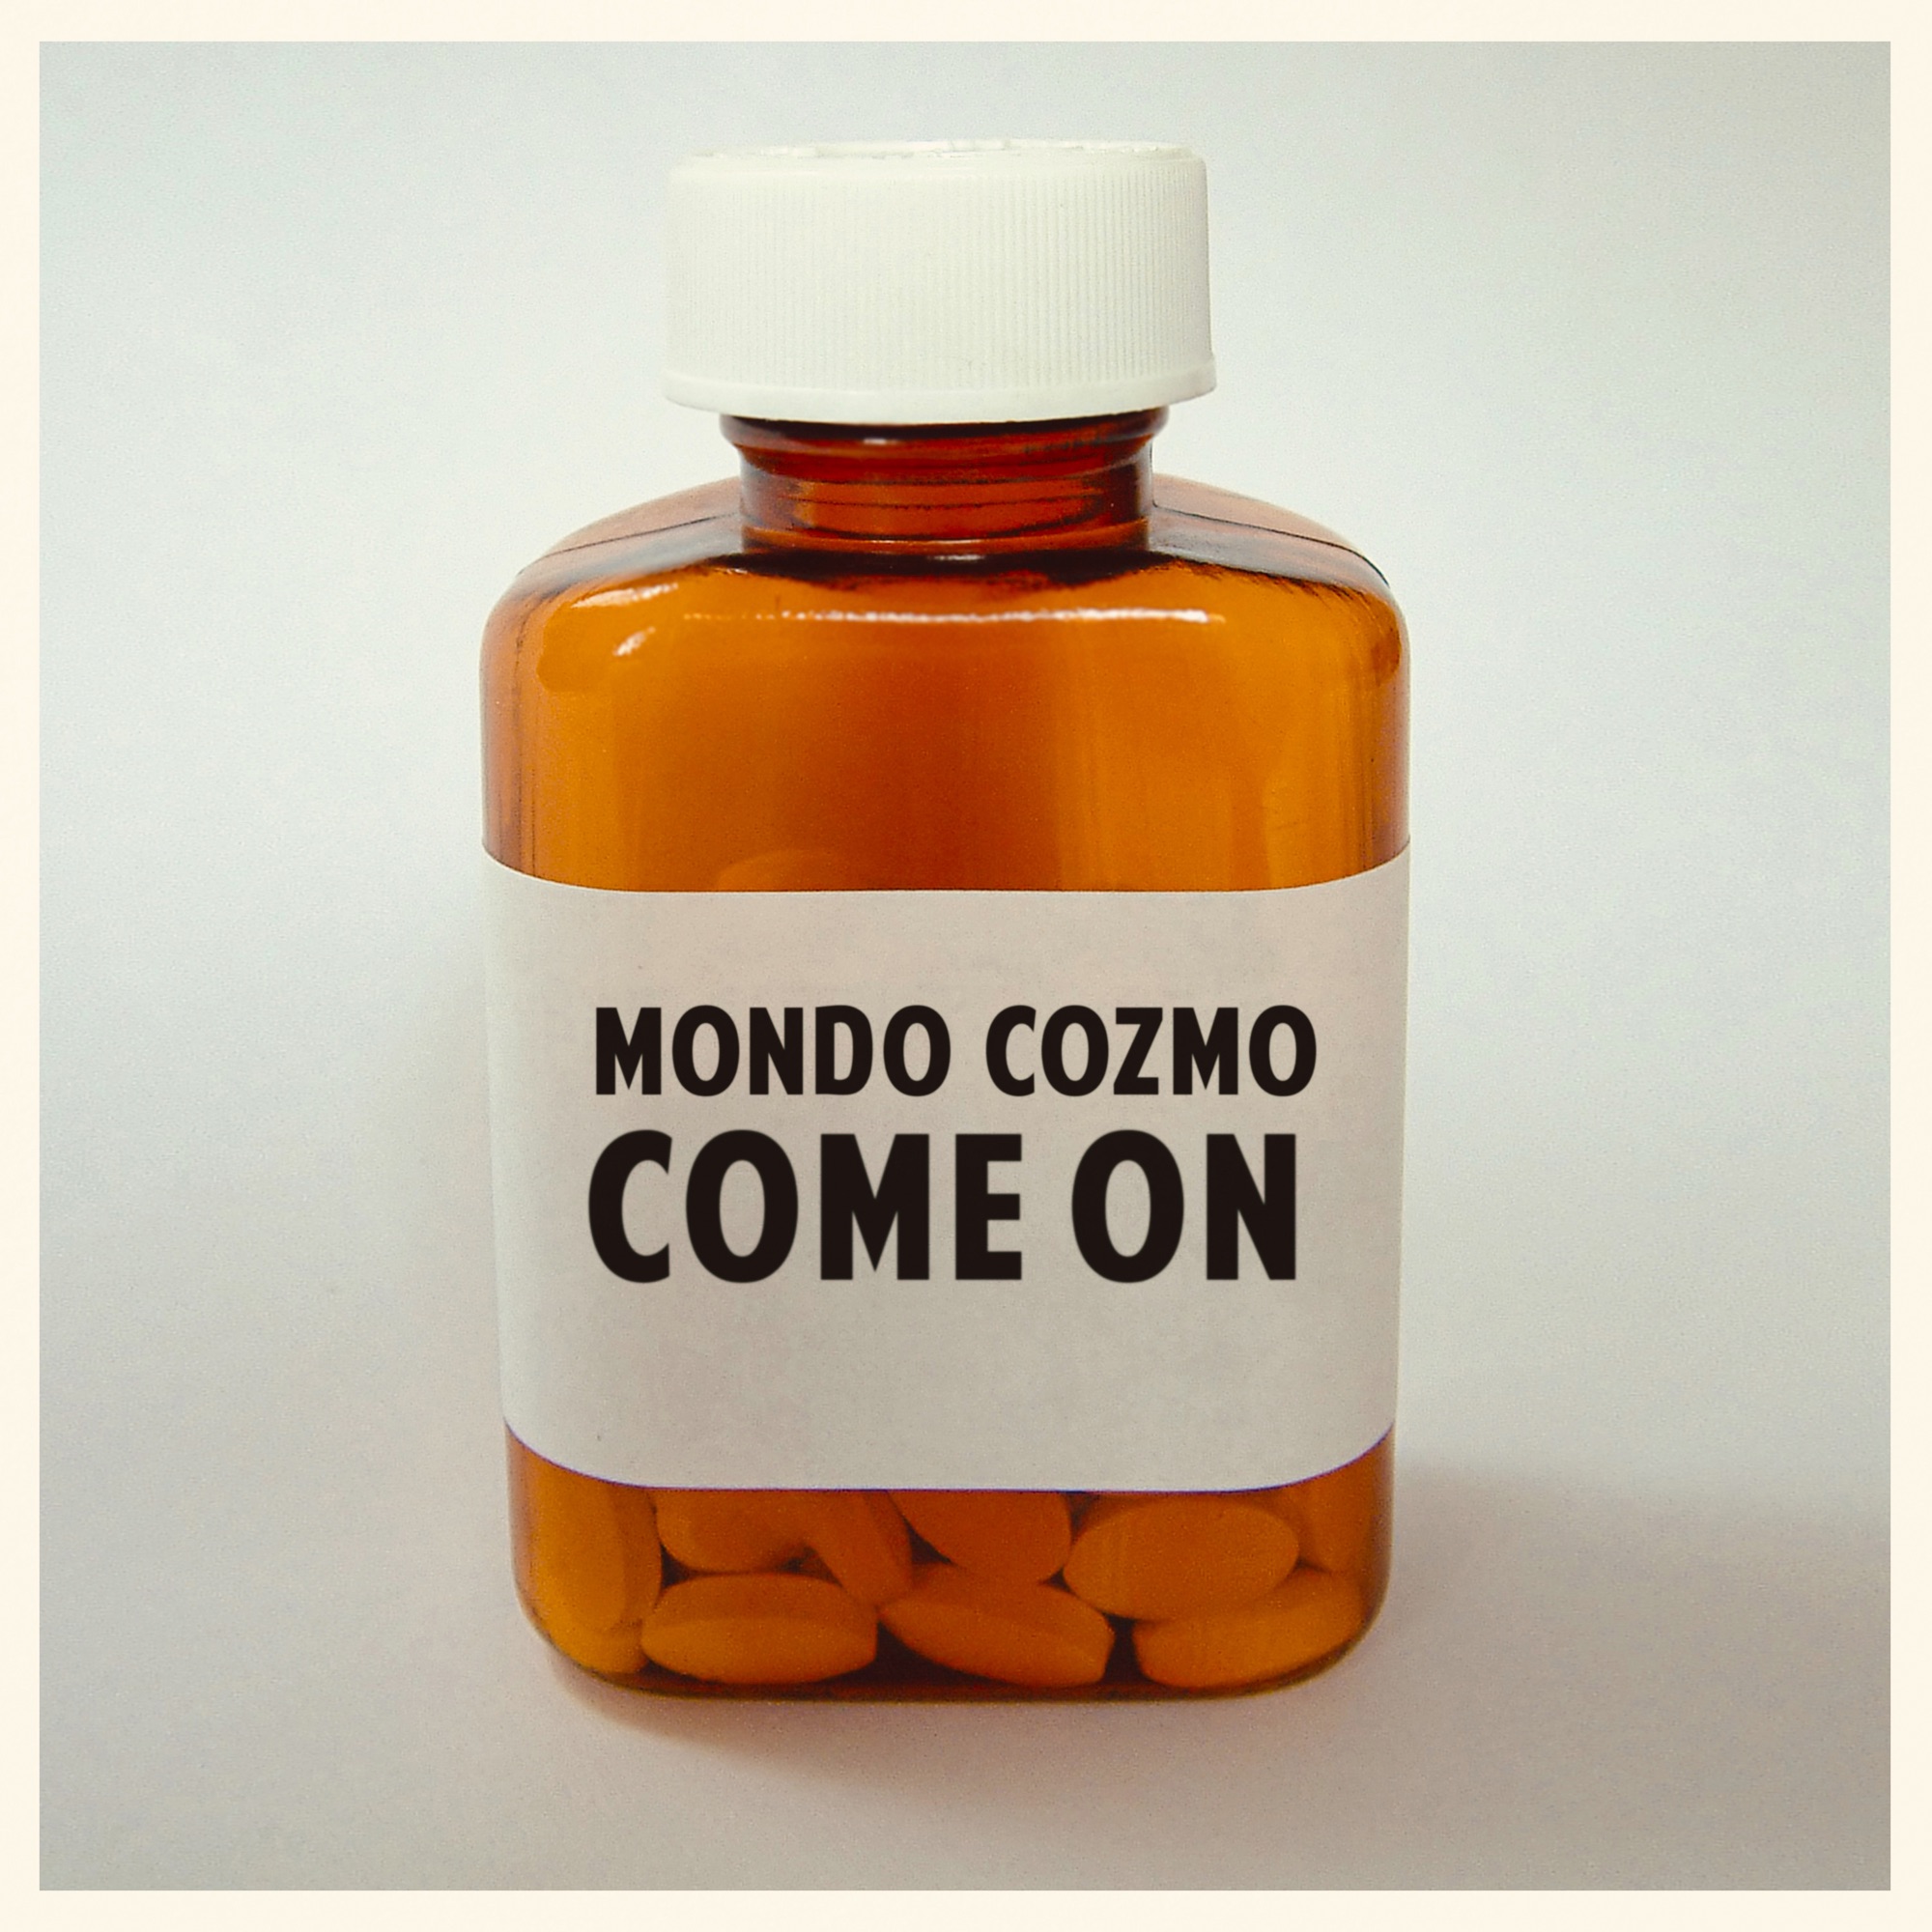 Art for Come On by Mondo Cozmo